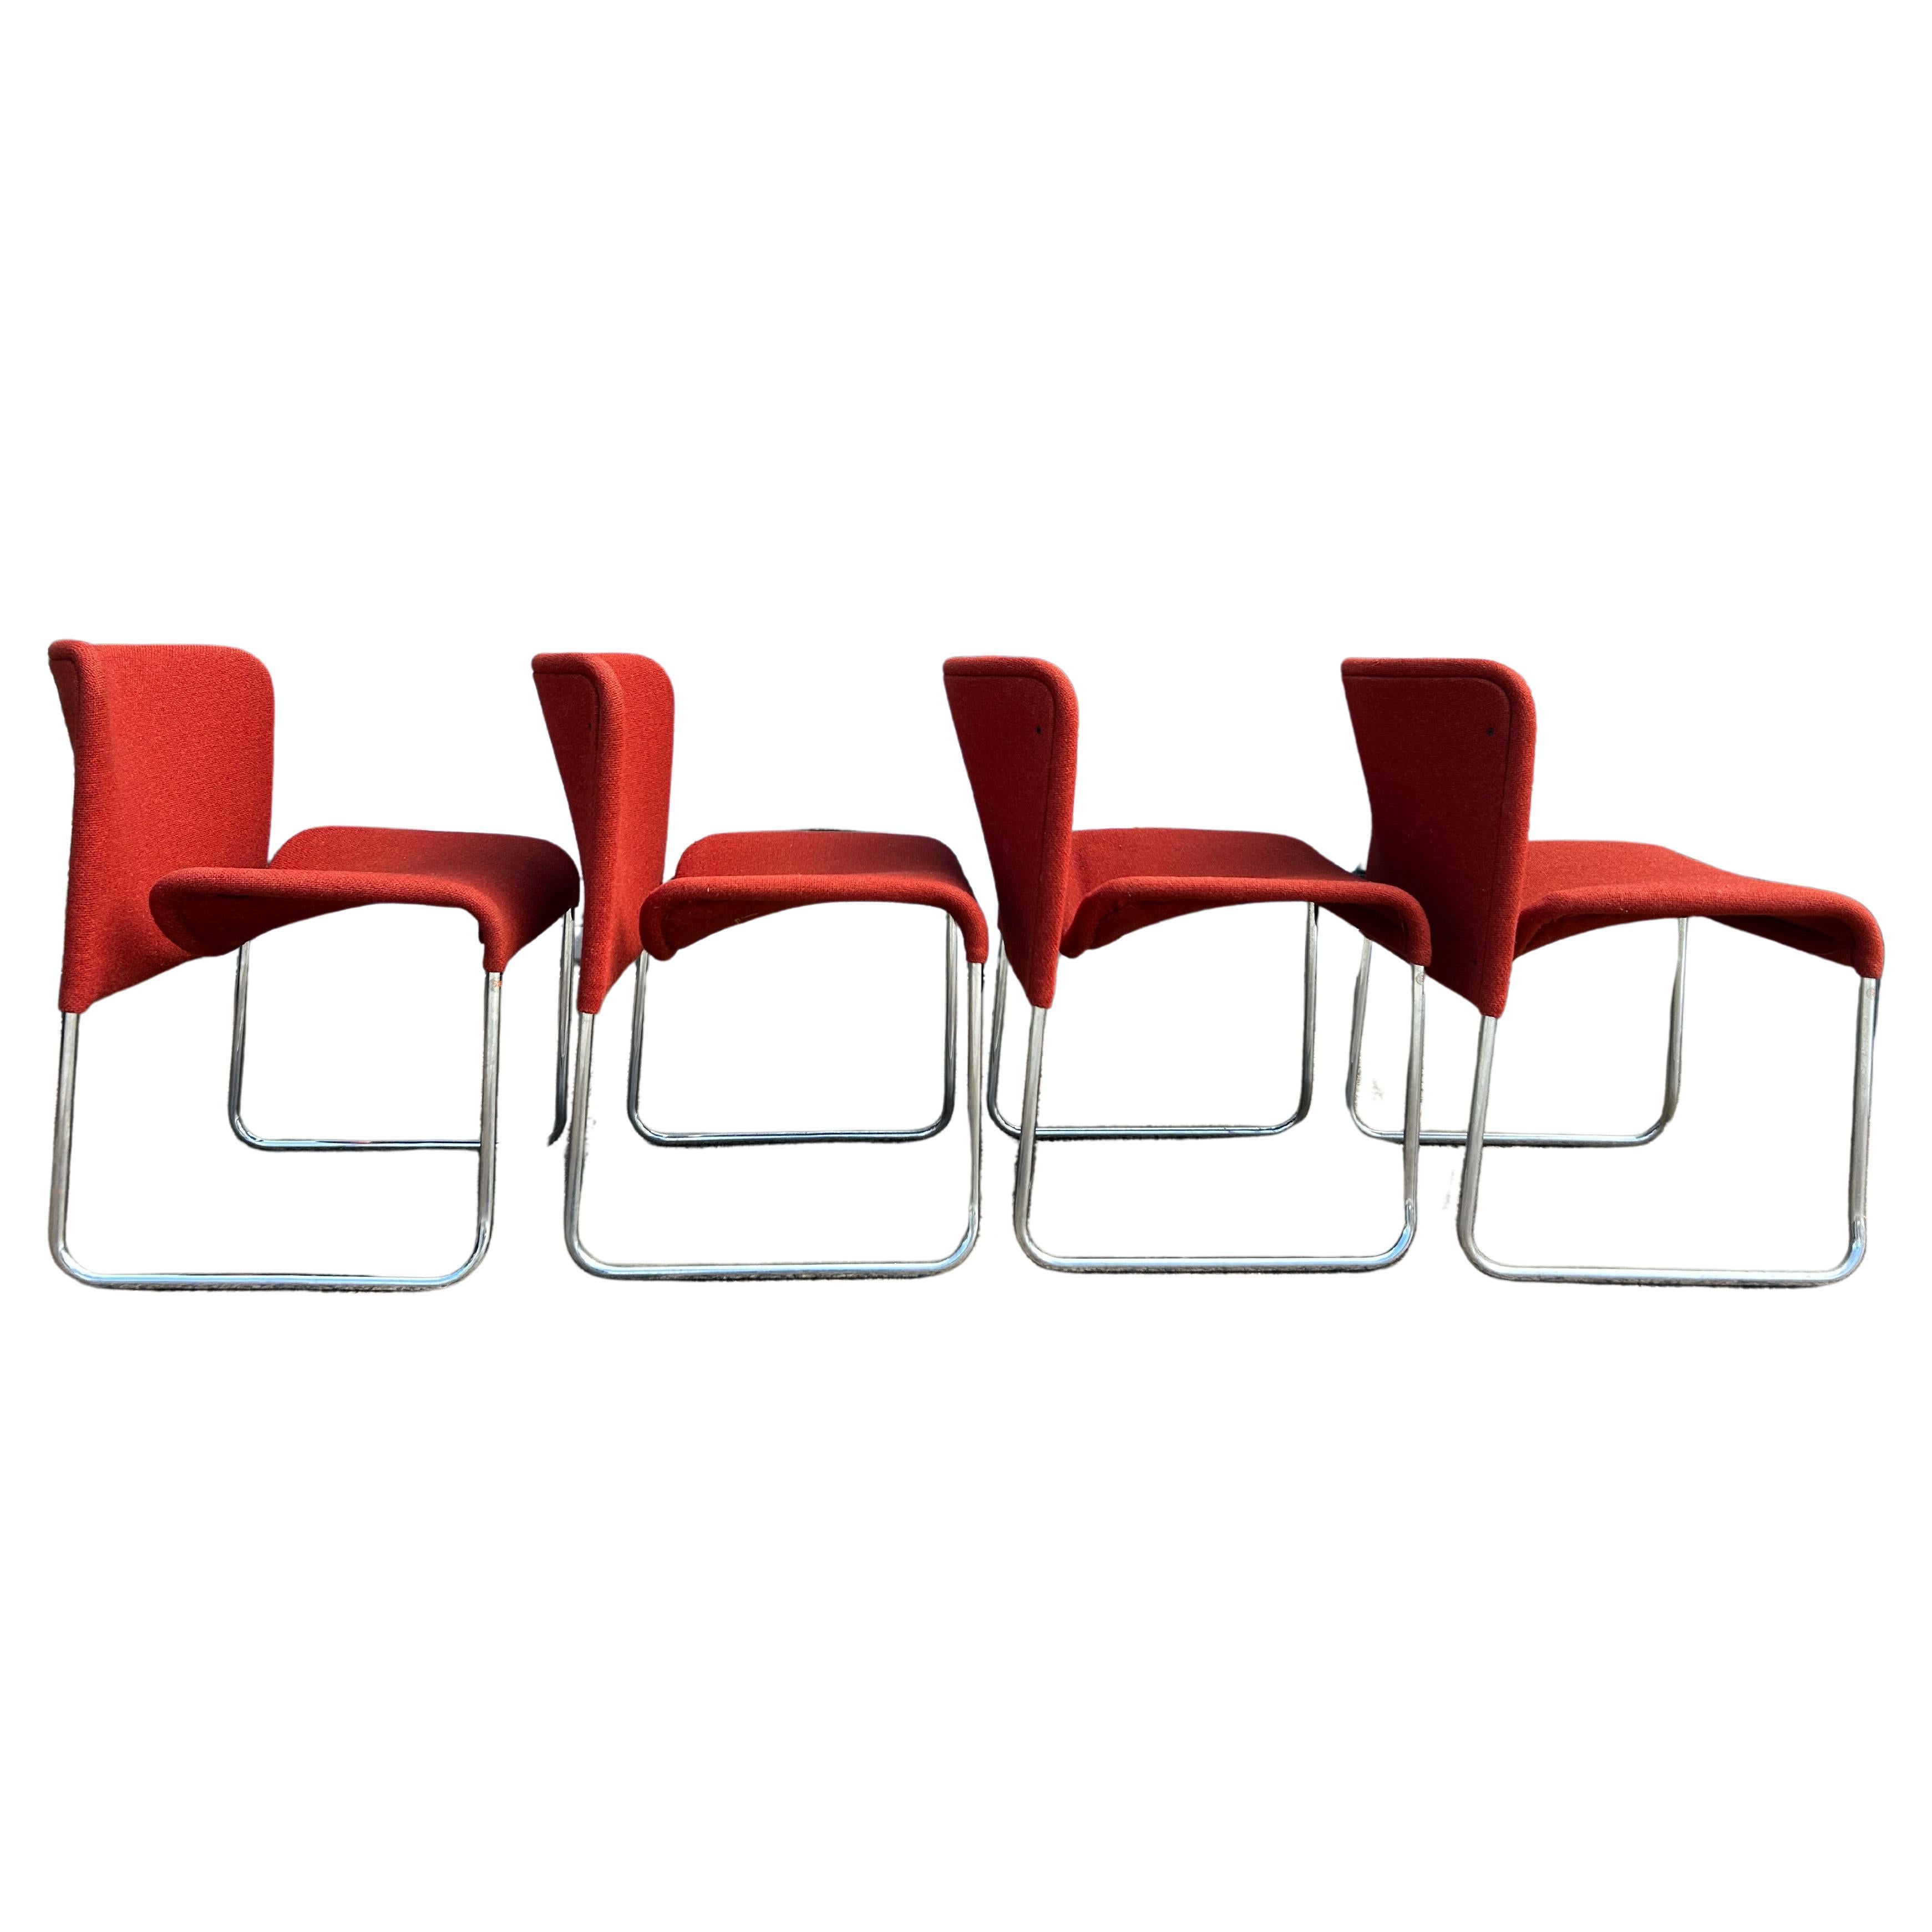 Rare Set (4) Ecco chrome red woven wool Stackable chairs by Møre Design team For Sale